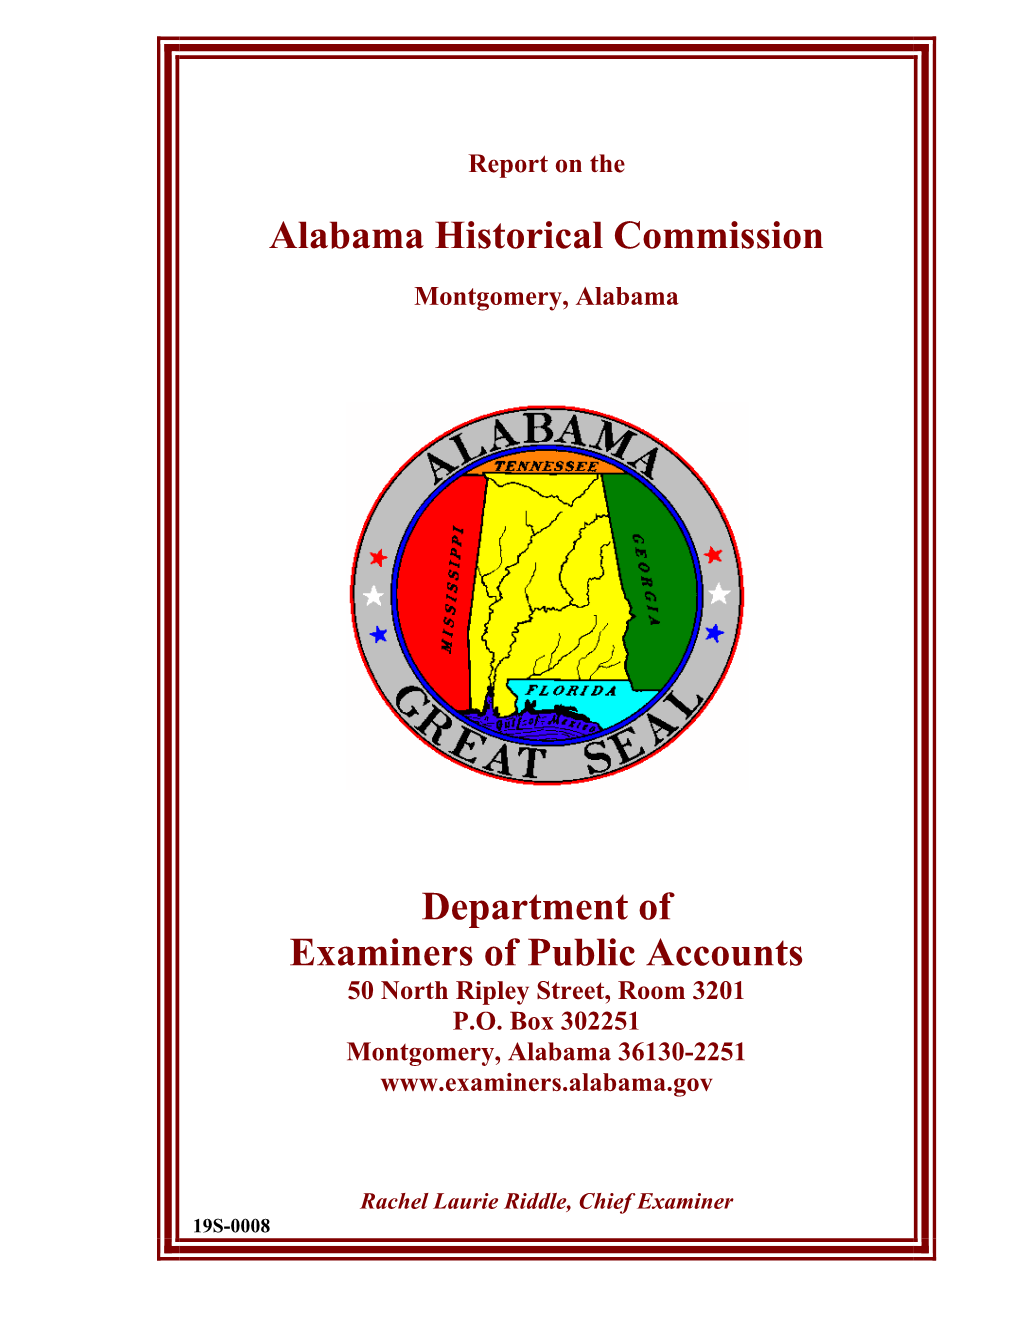 Alabama Historical Commission Department of Examiners of Public